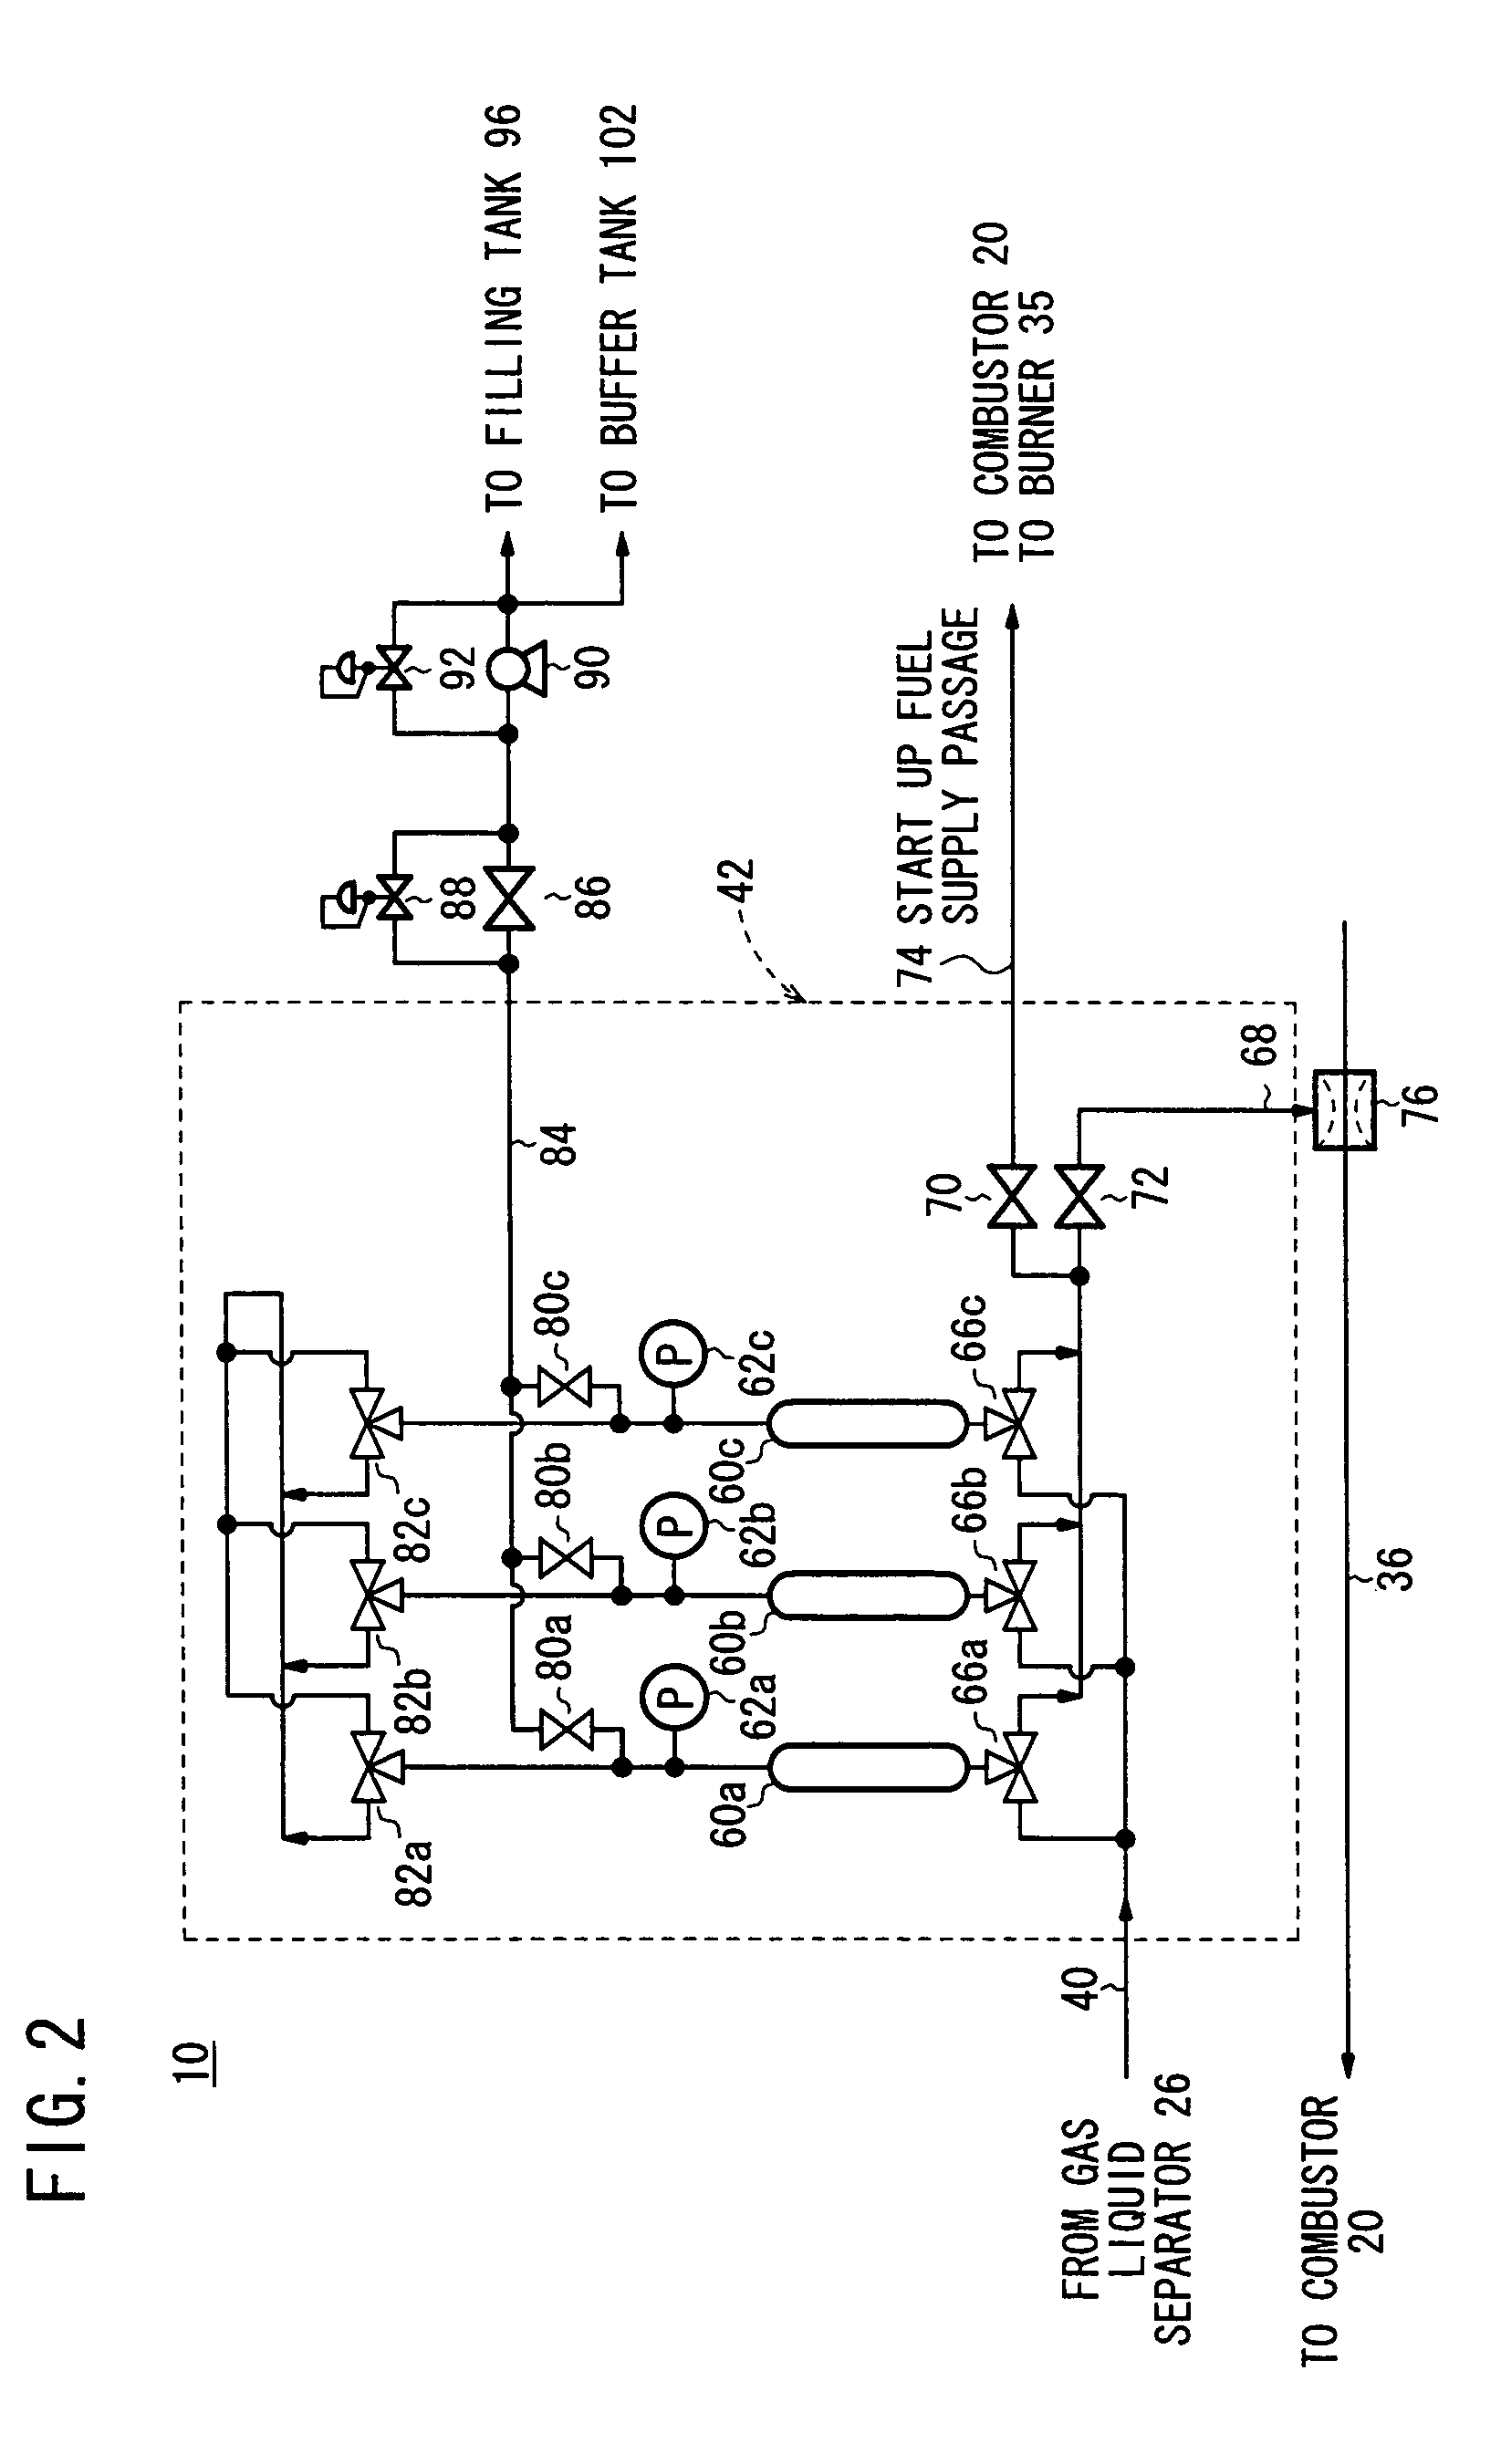 Method of controlling operation of fuel gas production apparatus